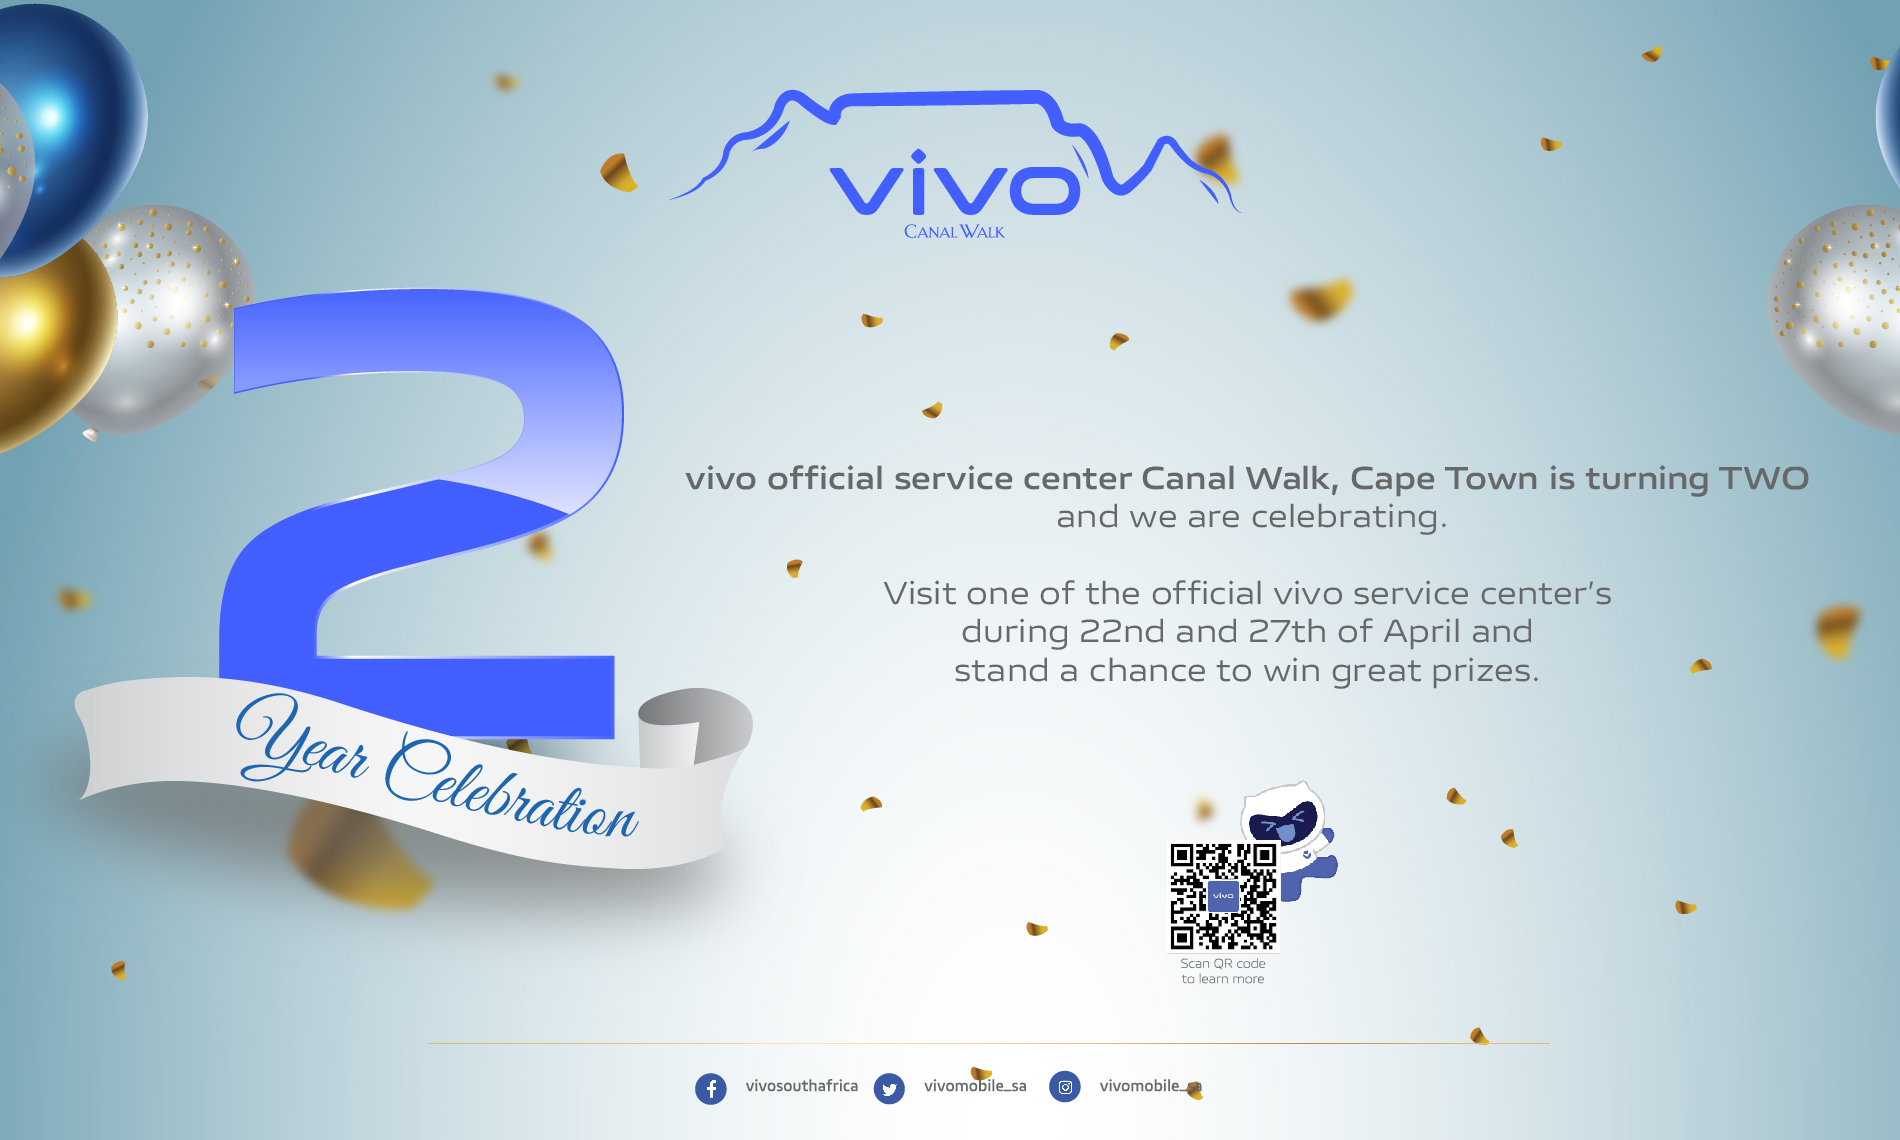 Cape Town official vivo service center is turning 2.